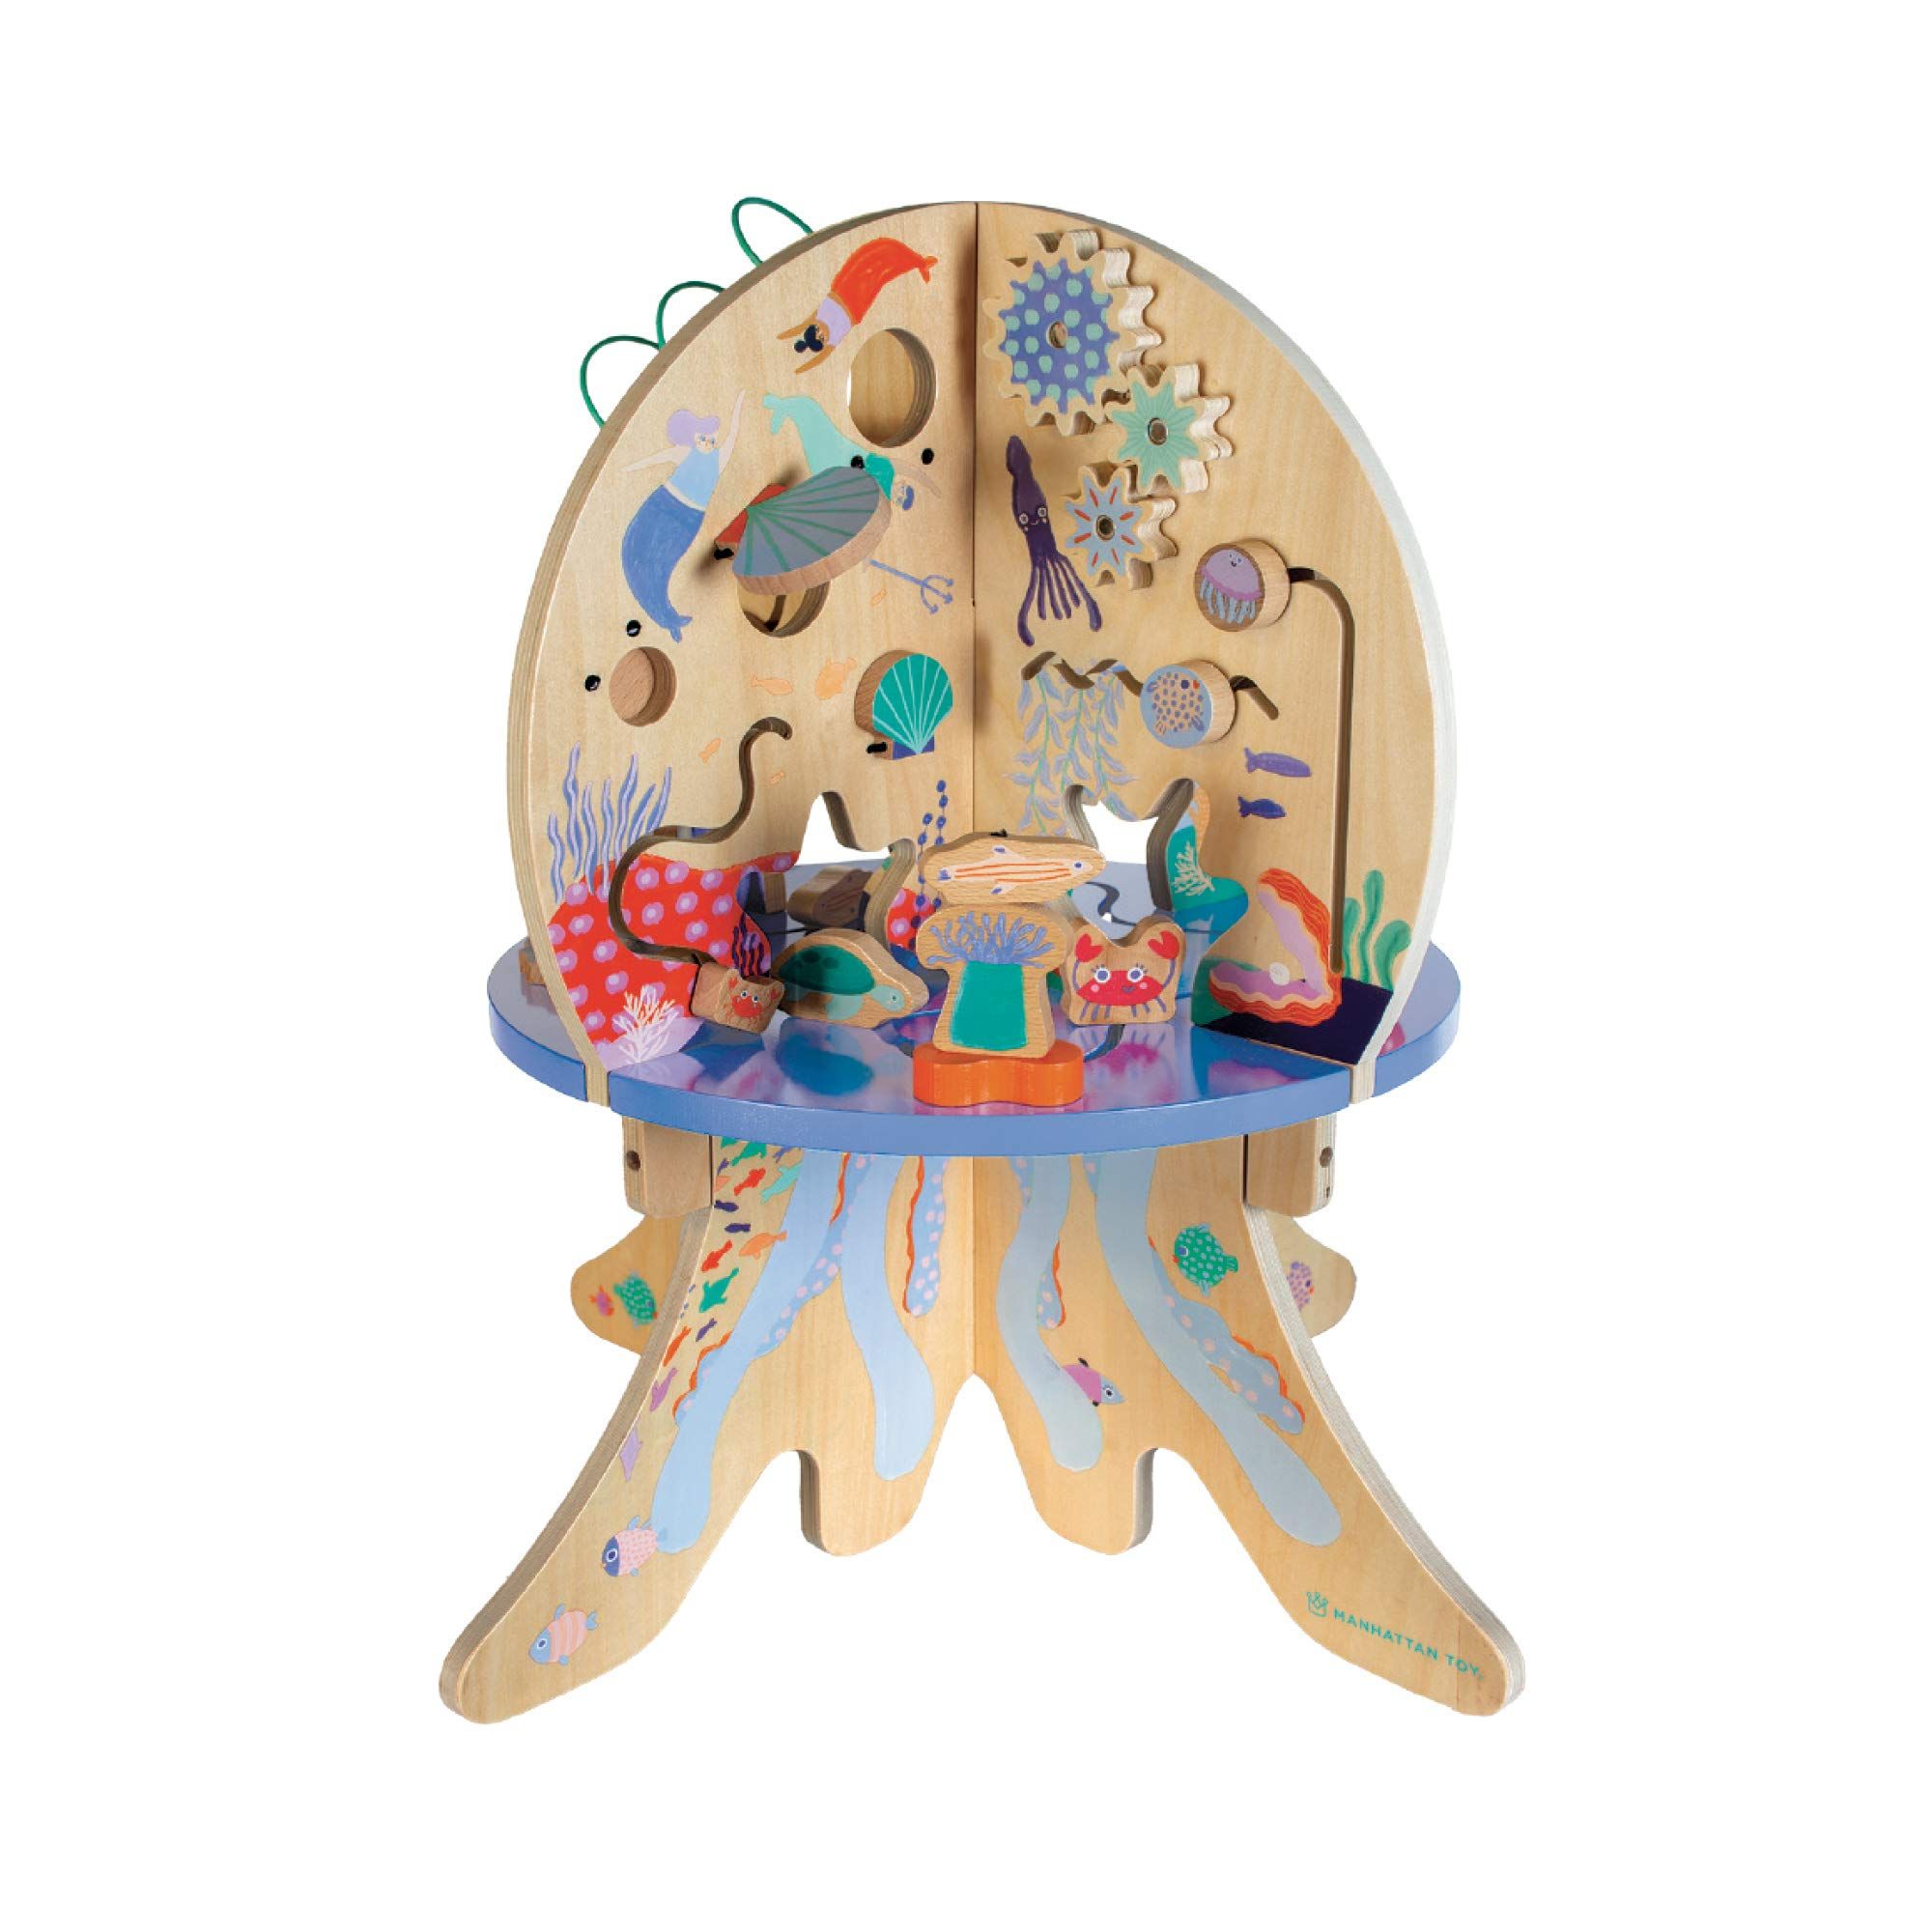 Manhattan Toy Deep Sea Adventure Wooden Toddler Activity Center with Clacking Clams, Spinning Gea... | Amazon (US)